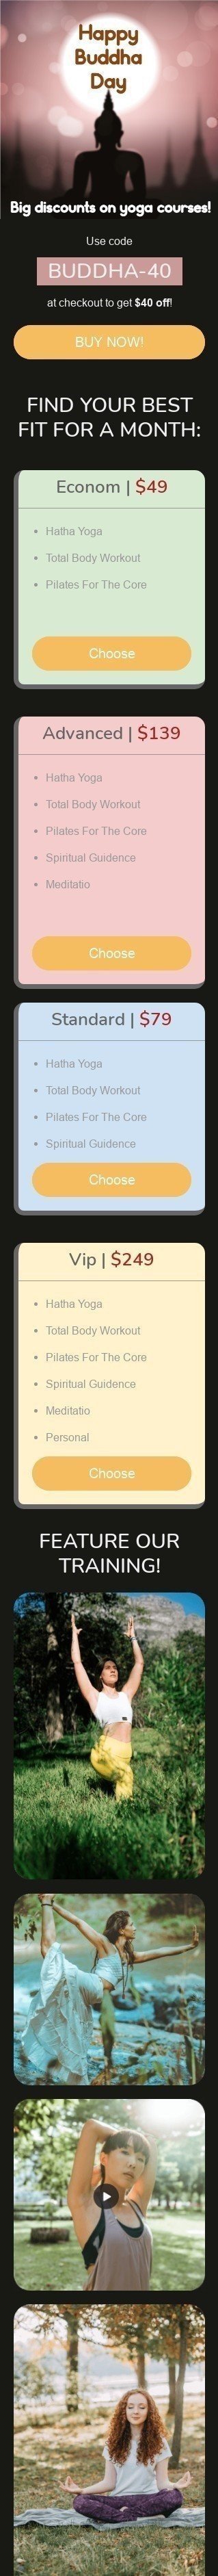 Buddha day Email Template «Yoga Courses» for Sports industry mobile view